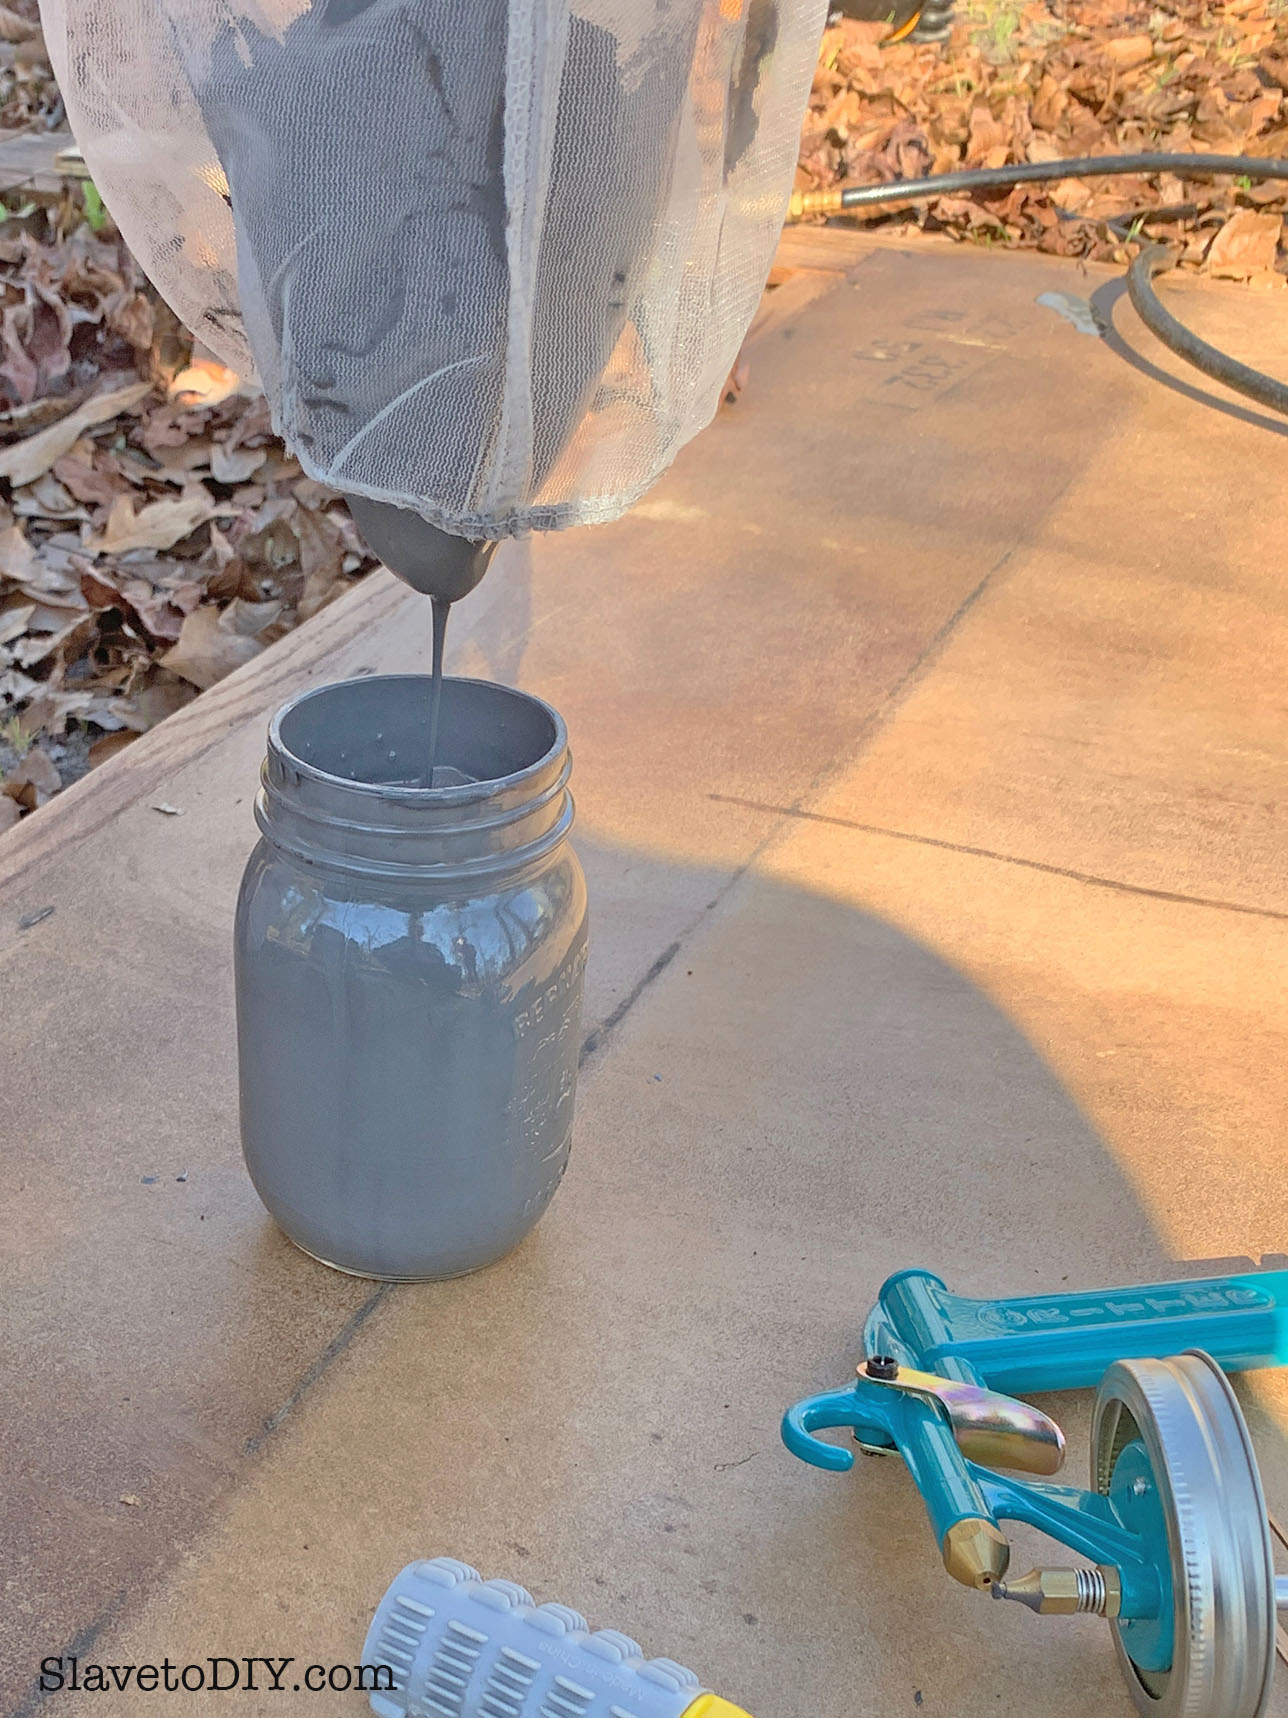 How To Use An Inexpensive Paint Sprayer and Get Outstanding Results